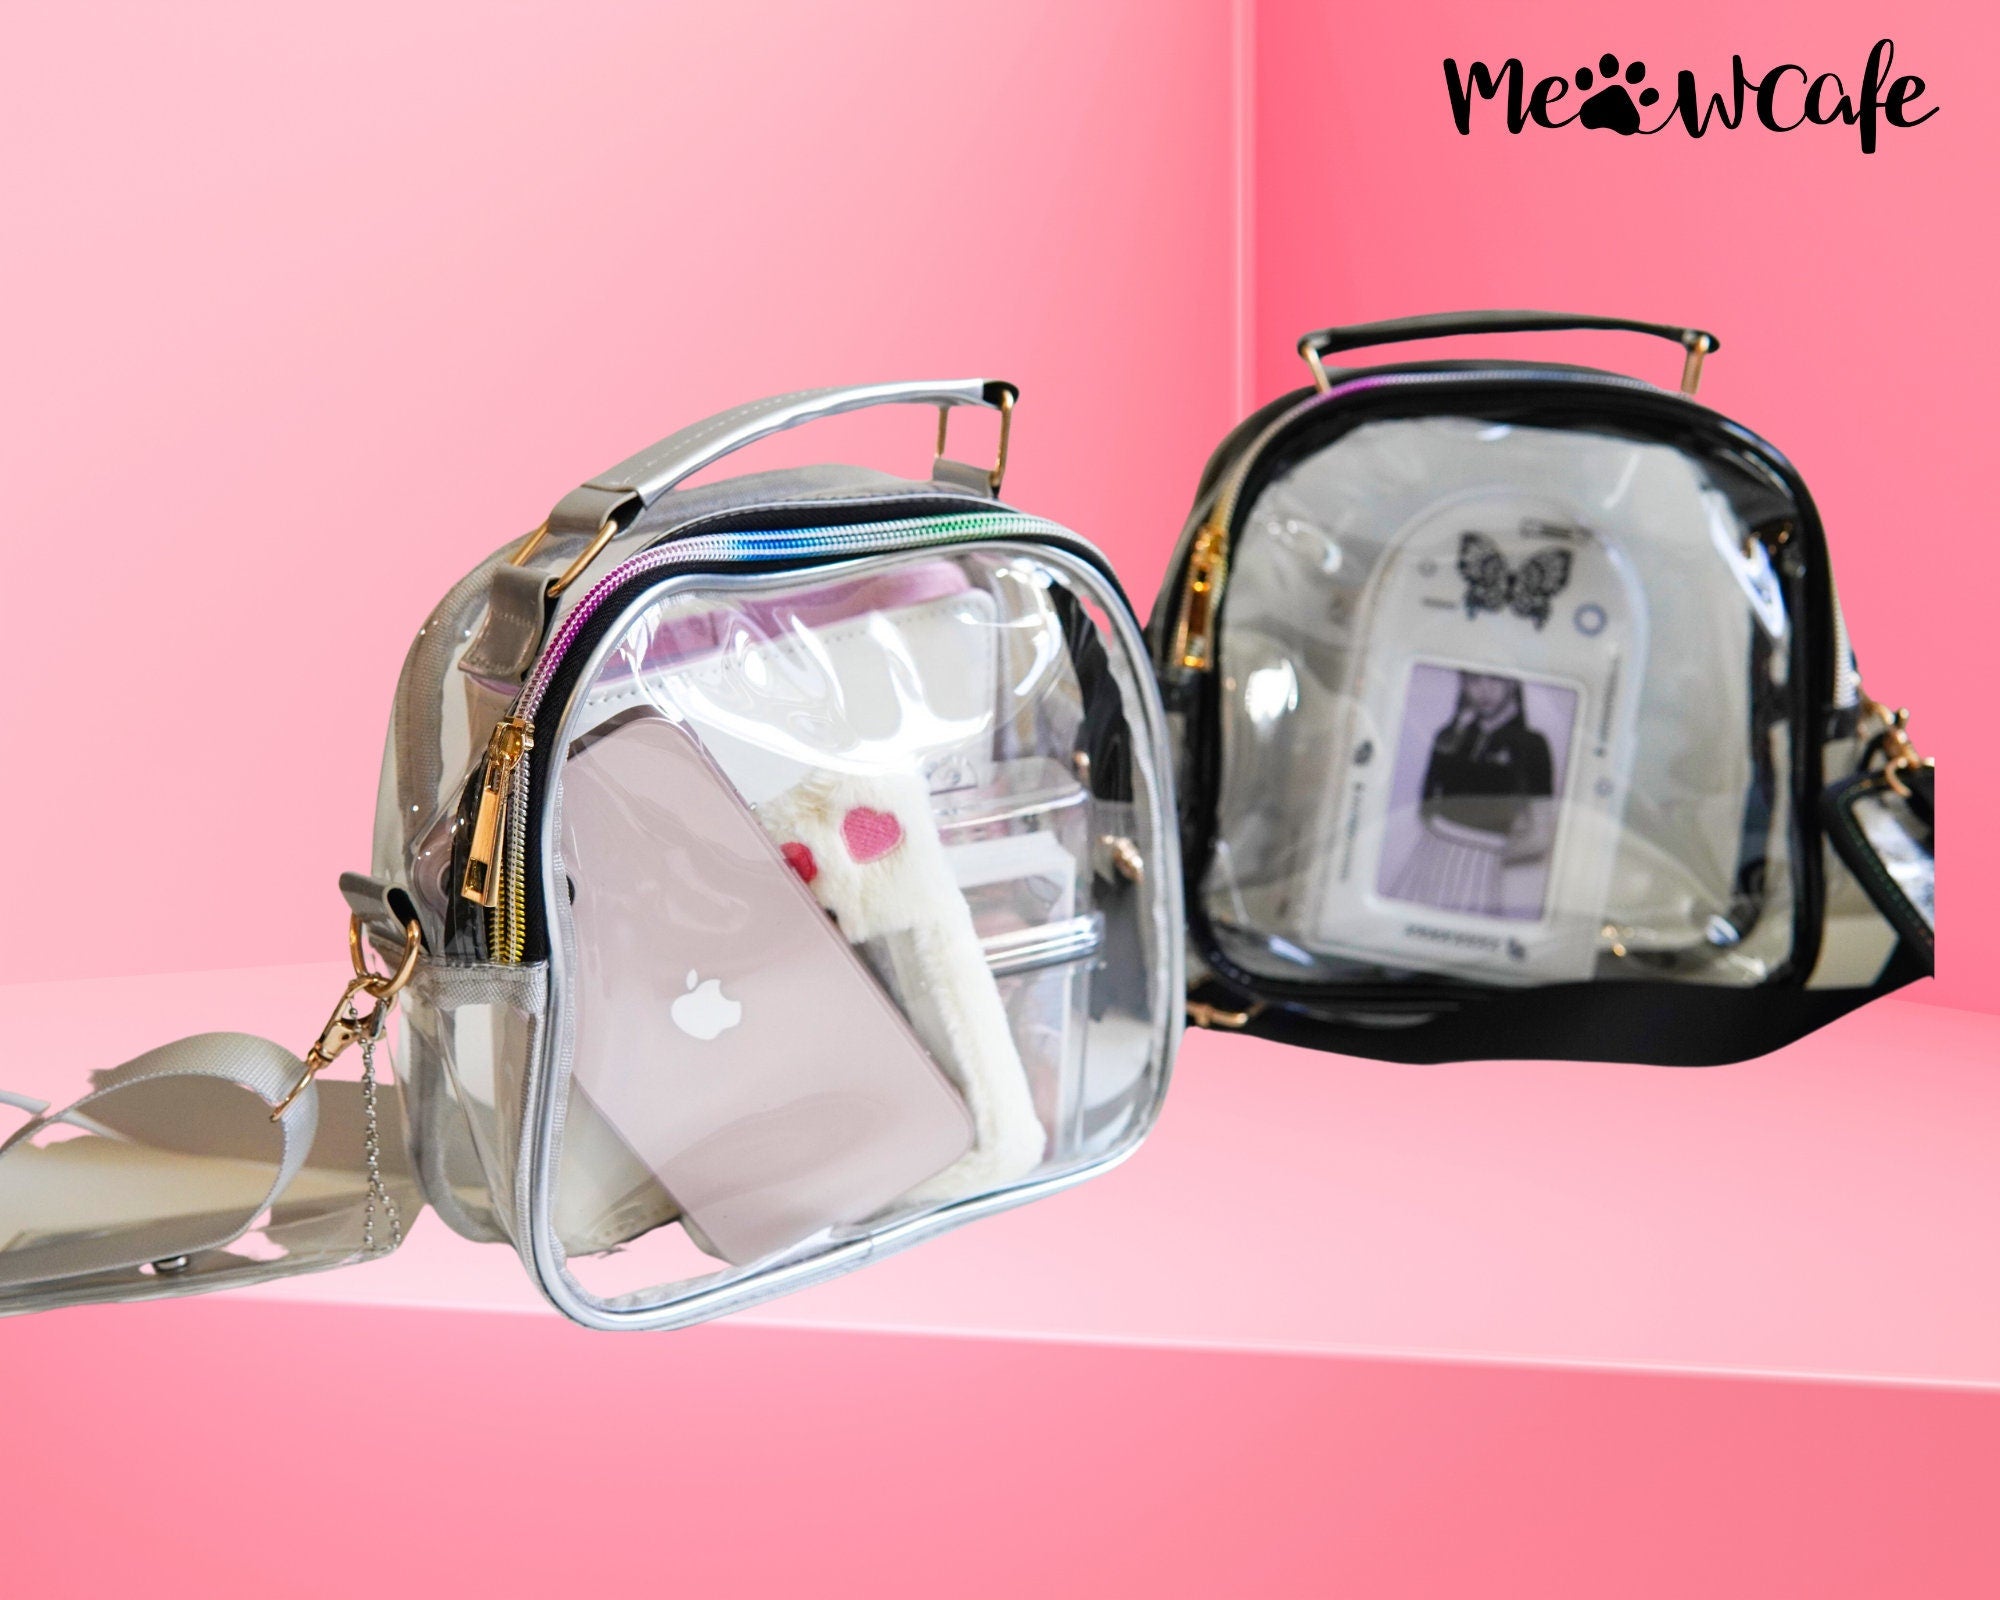 Clear Kpop Concert Bag | Stadium Approve Crossbody Kpop Merch Hologram Silver Black Game Day Bag Cute Adjustable Strap Gifts for Kpop Stan